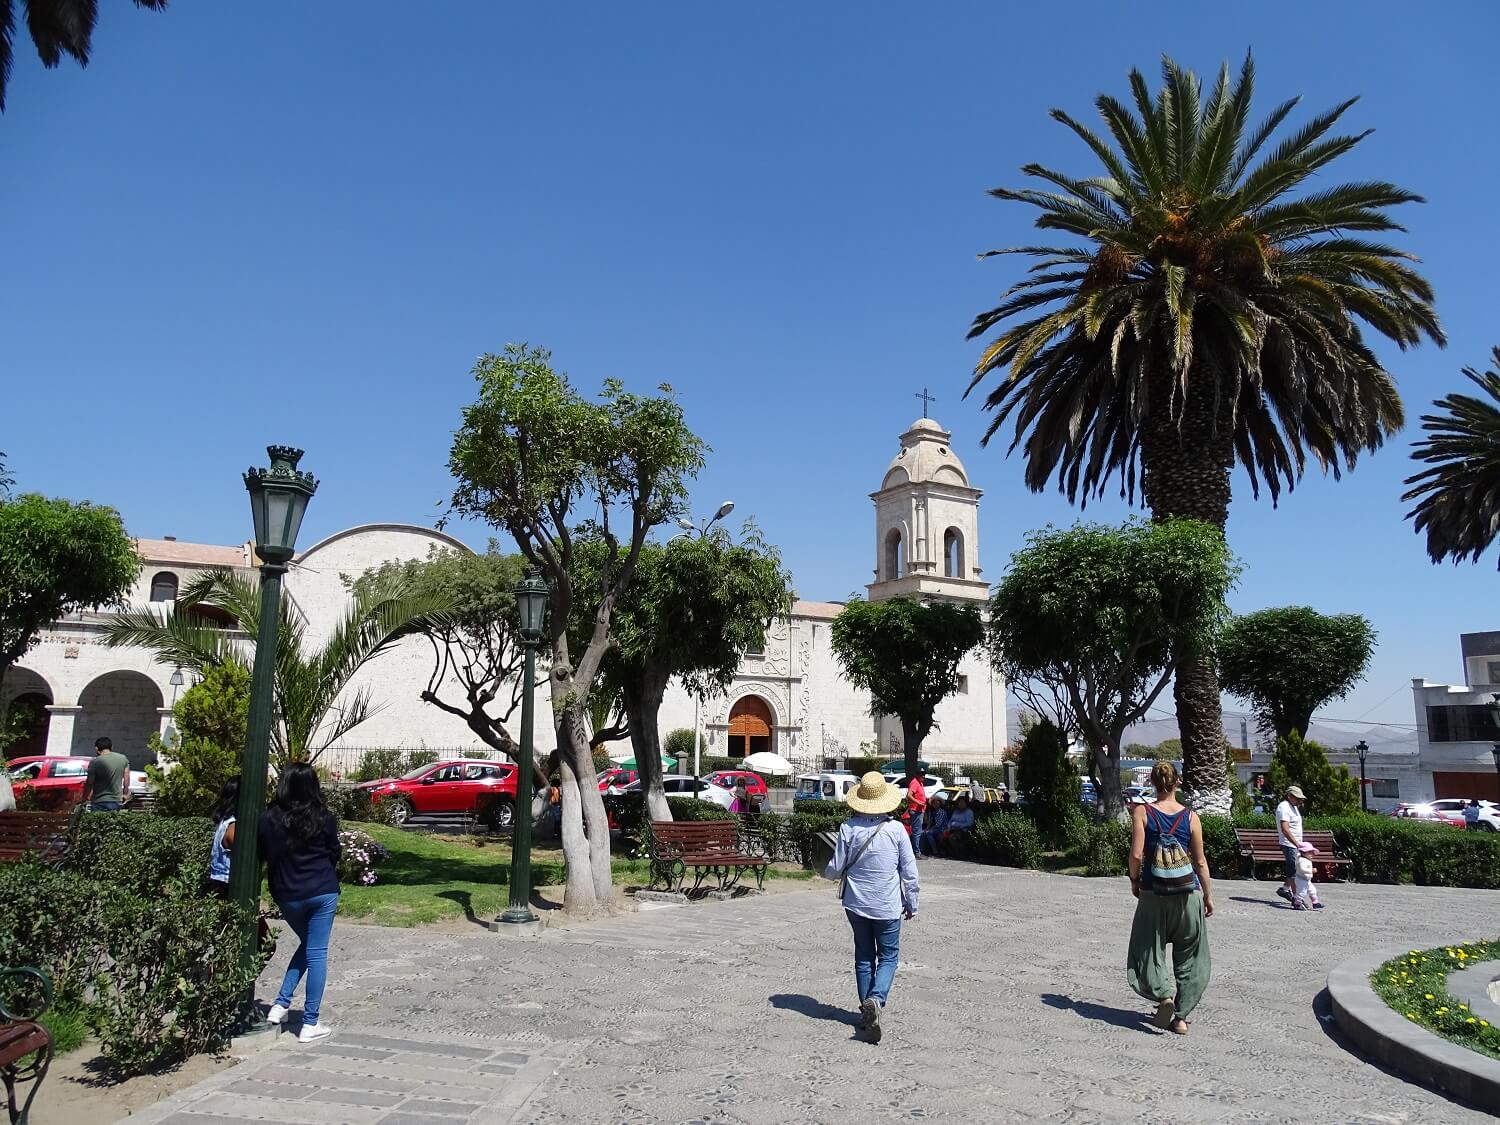 The church and square of Yanahuara offer an amazing view of the city of Arequipa - RESPONSible Travel Peru